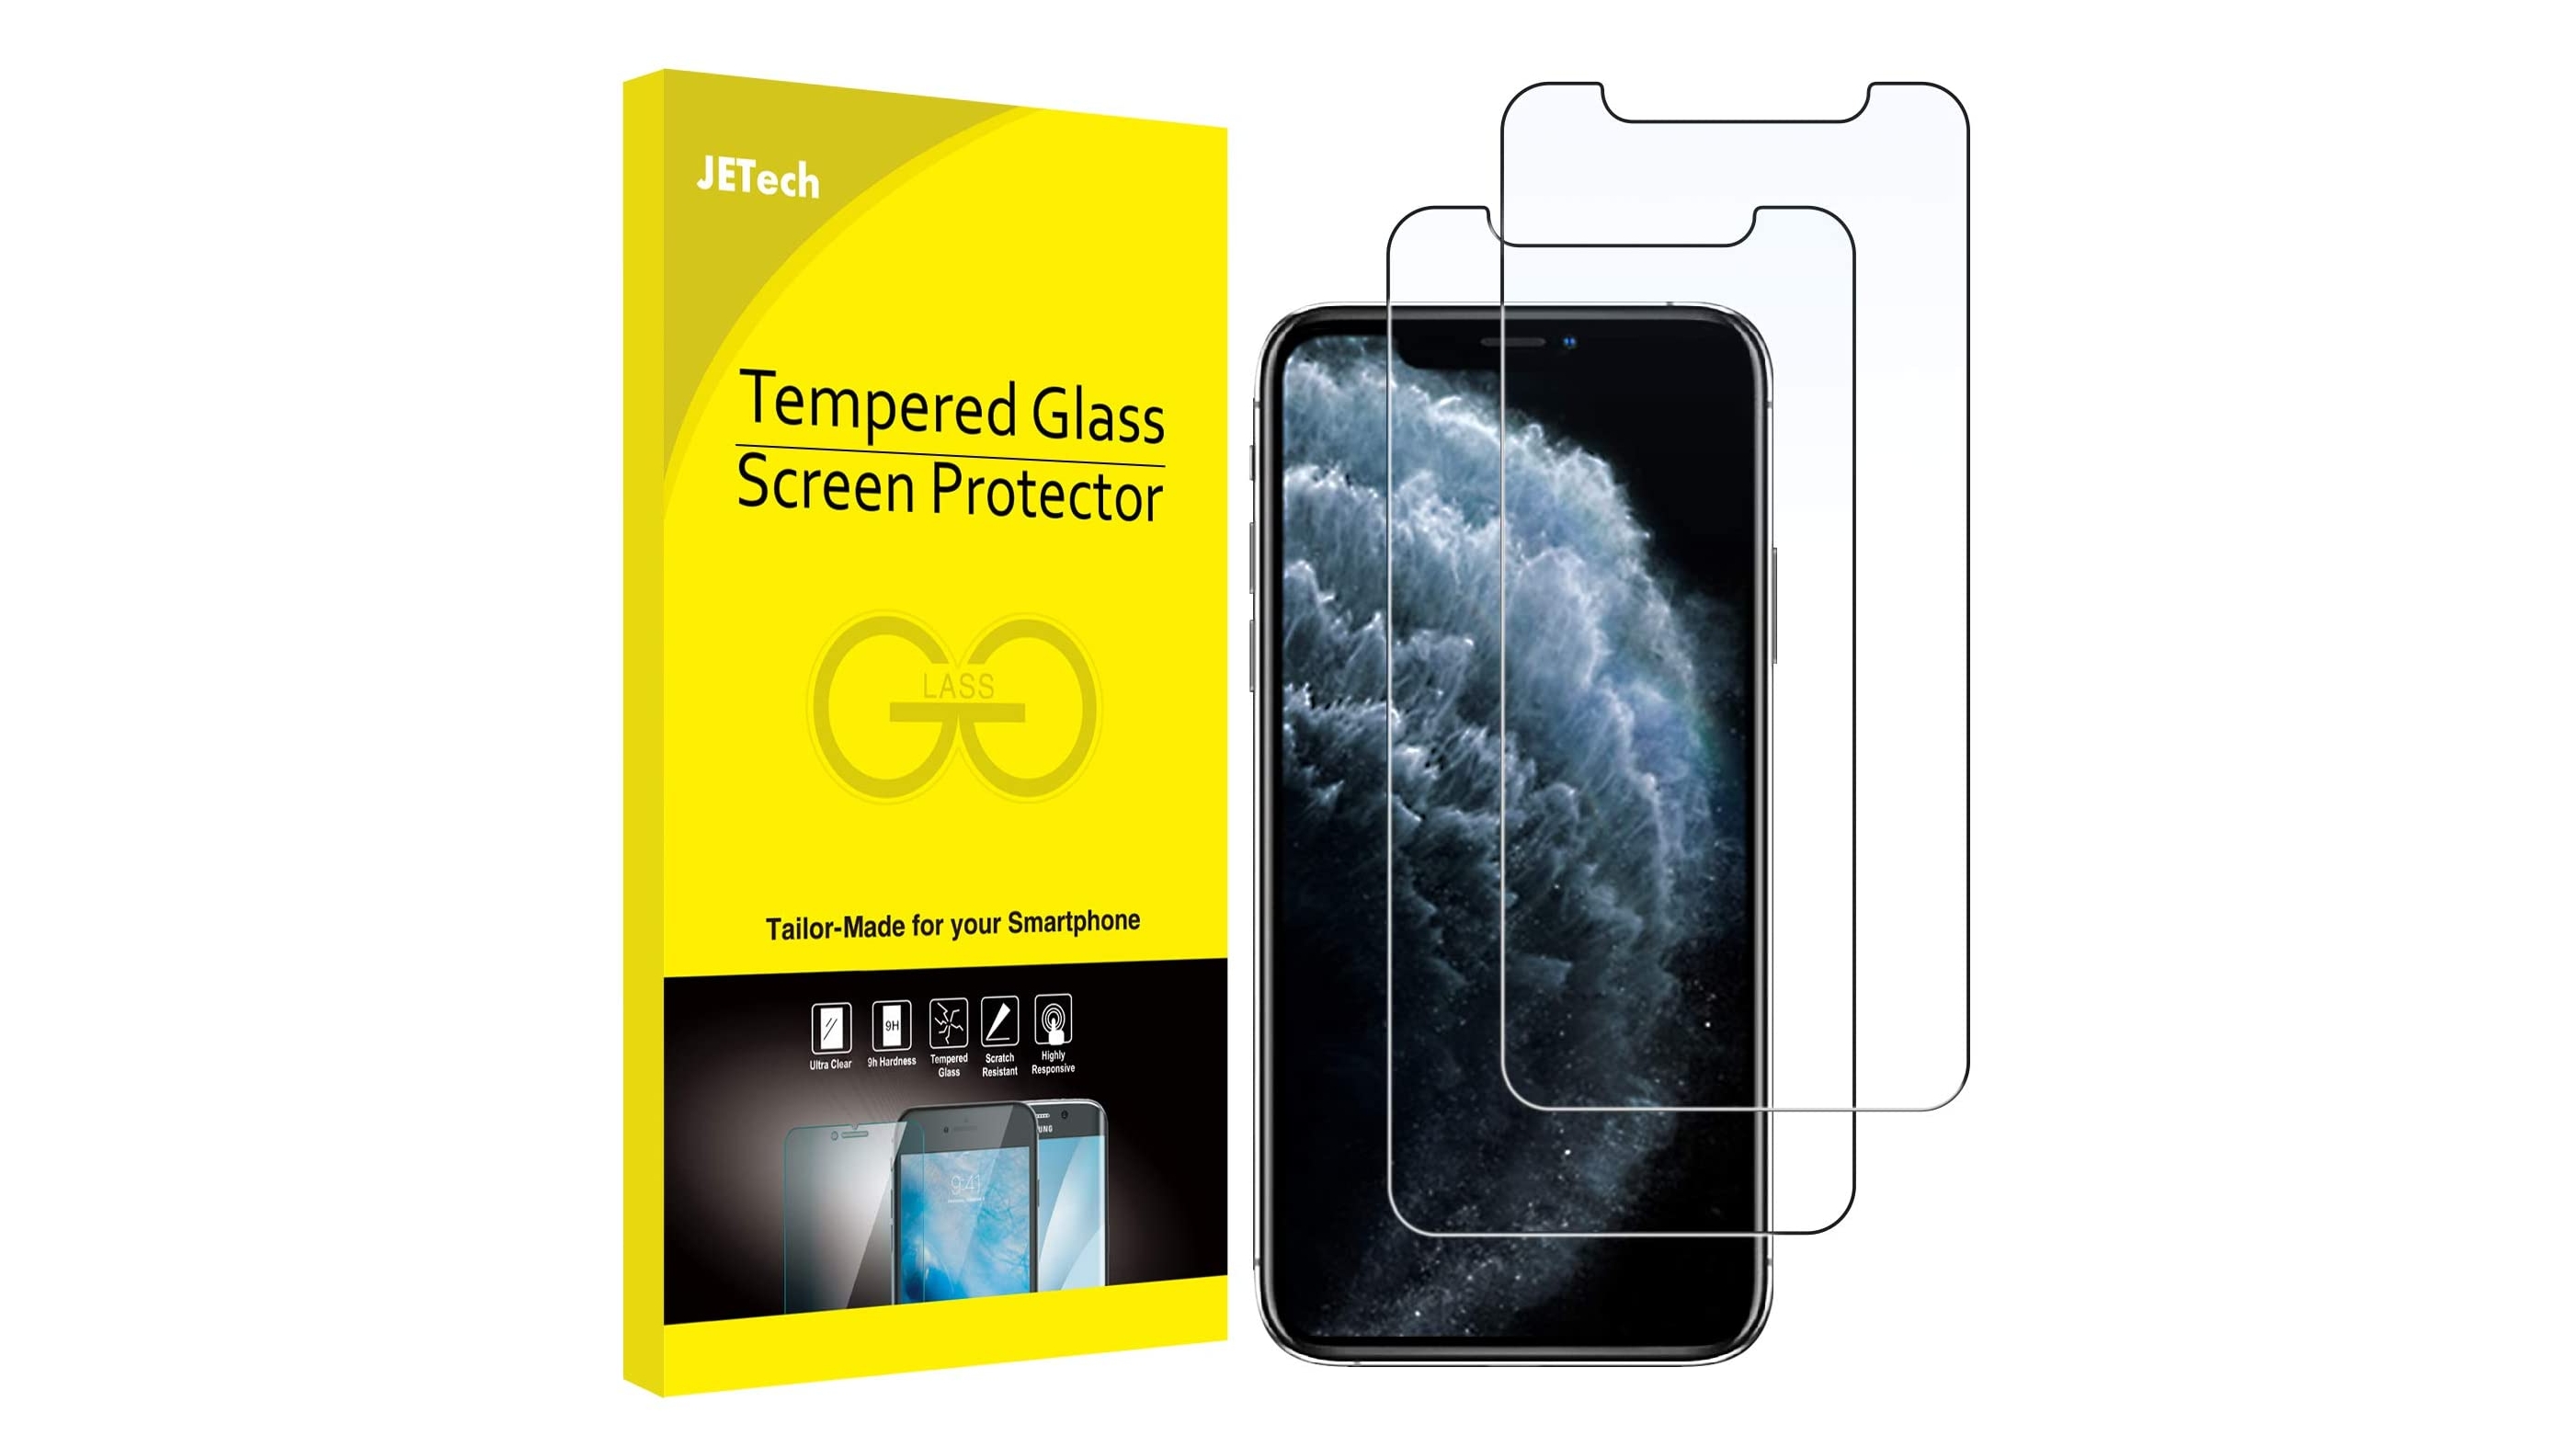 JETech Tempered Glass screen protector